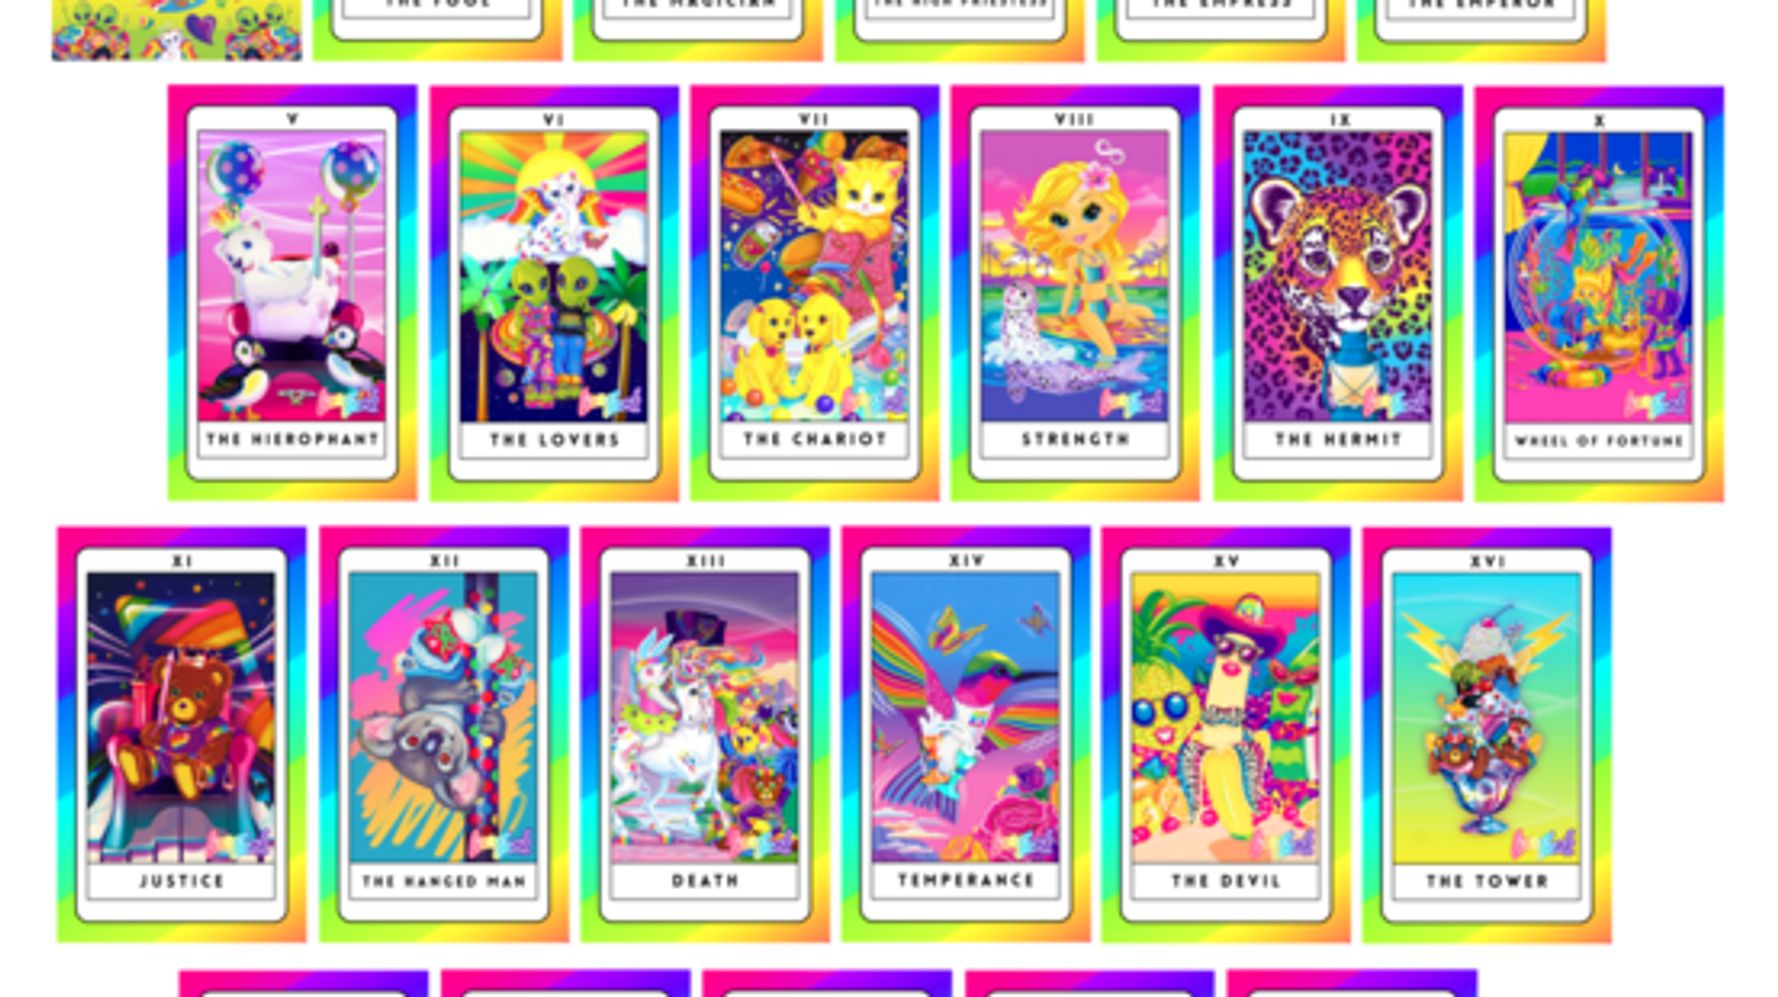 This Lisa Frank Tarot Deck Bring Out Inner | HuffPost Entertainment